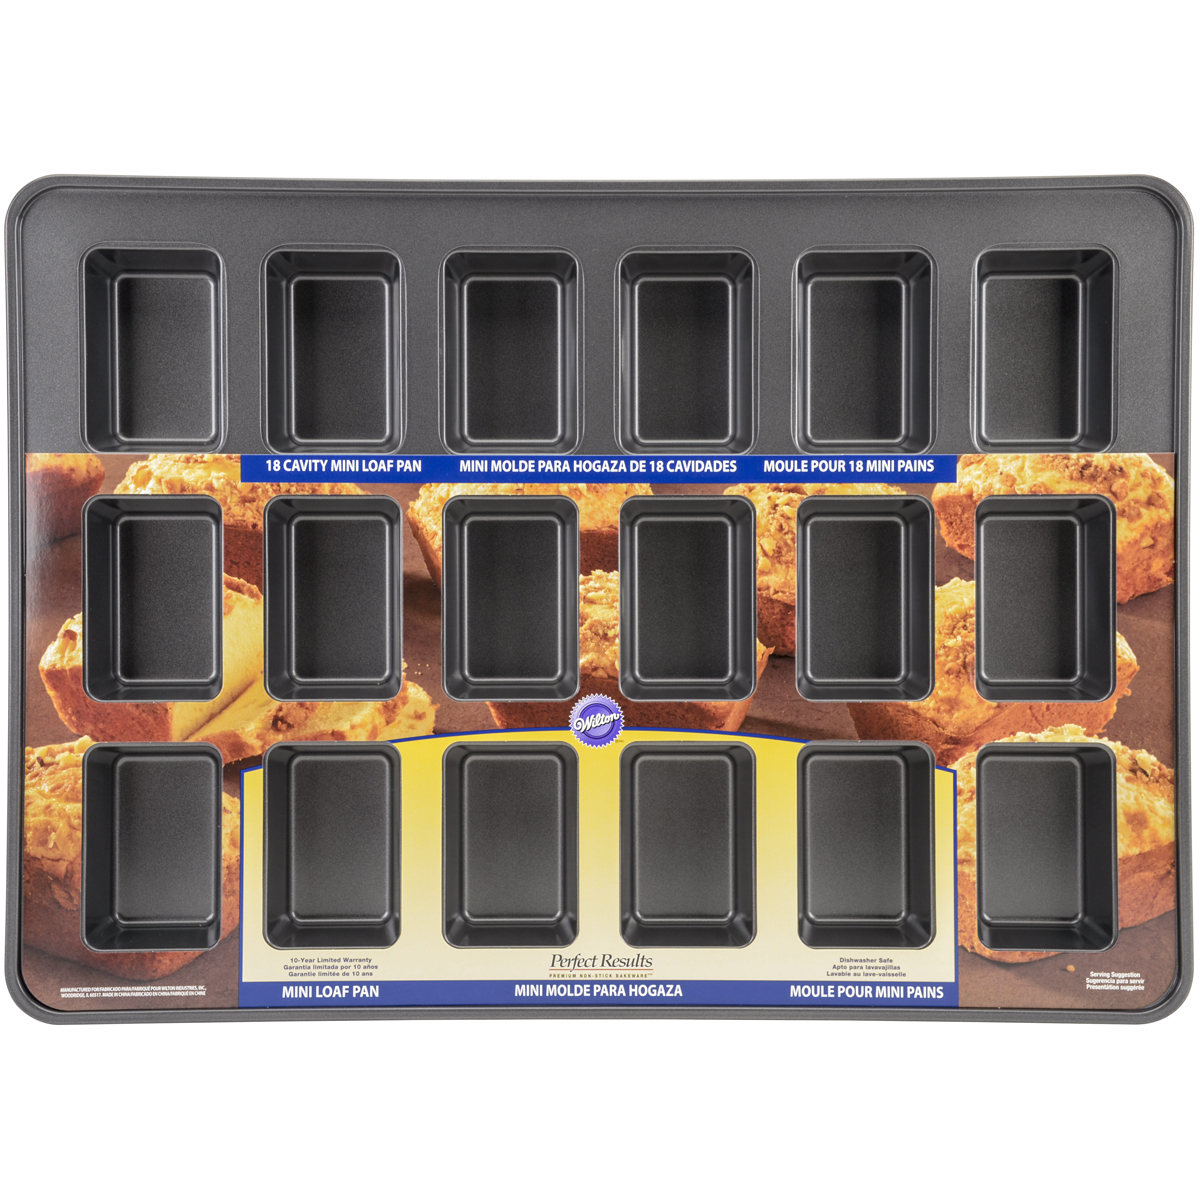 Primary image for Perfect Results Mega Mini Loaf Pan-18 Cavity 3.75".